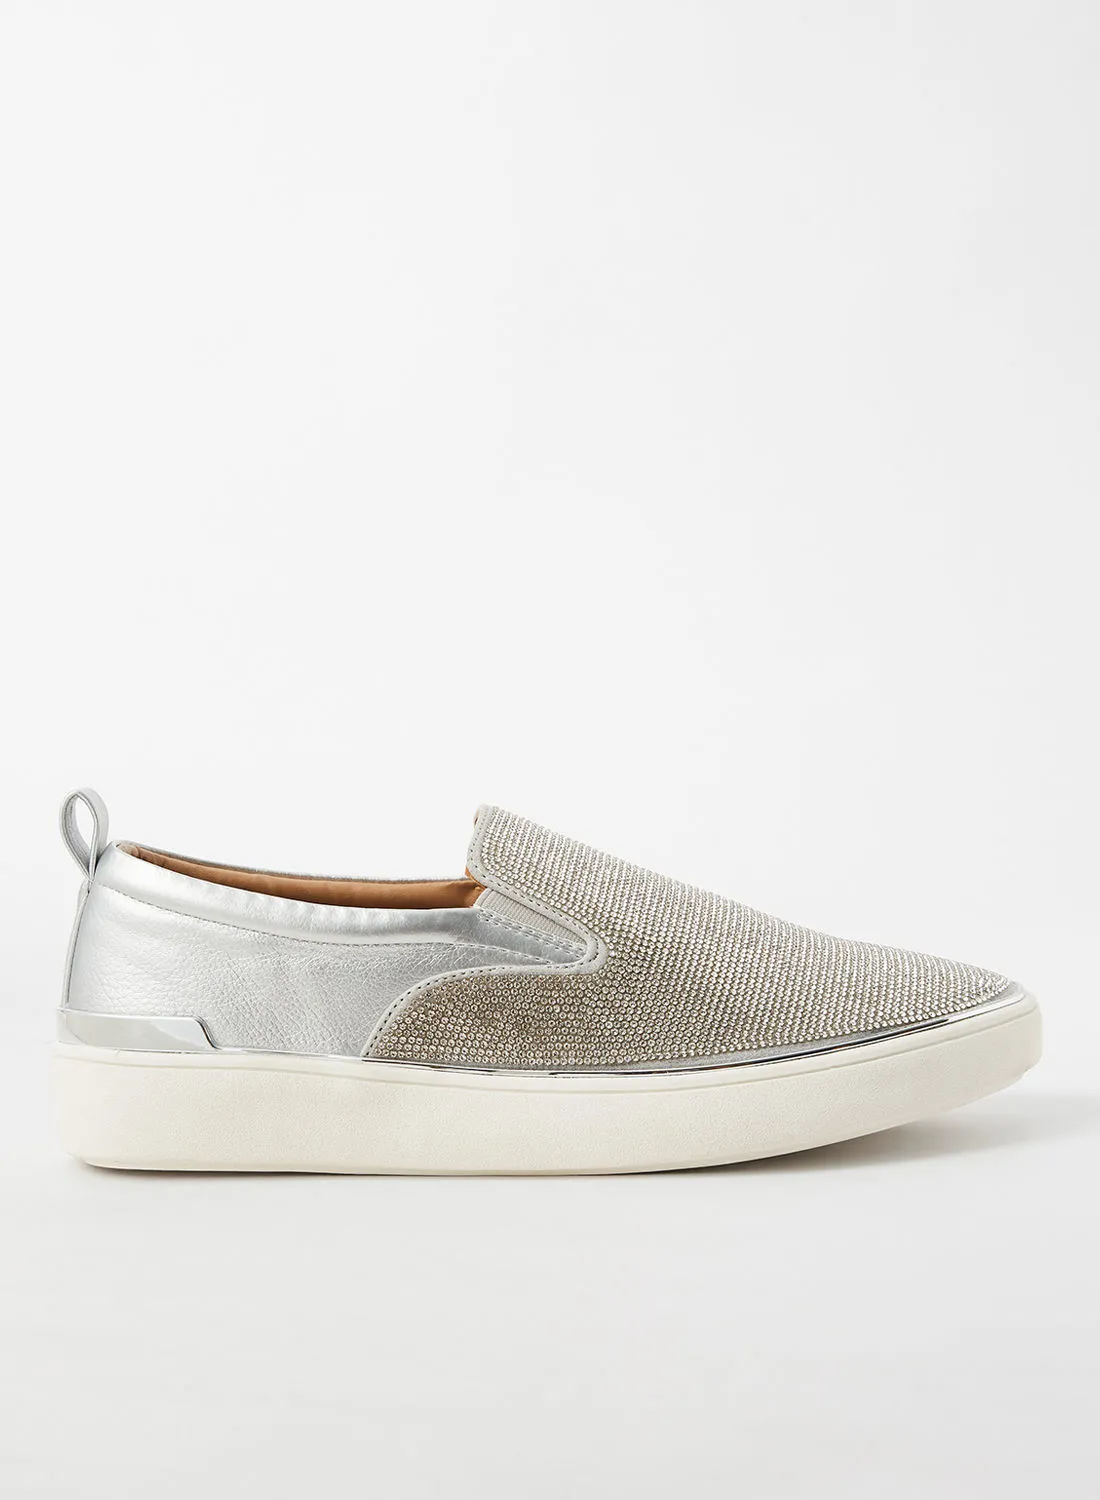 CALL IT SPRING Aprill Vegan Leather Slip-Ons Silver